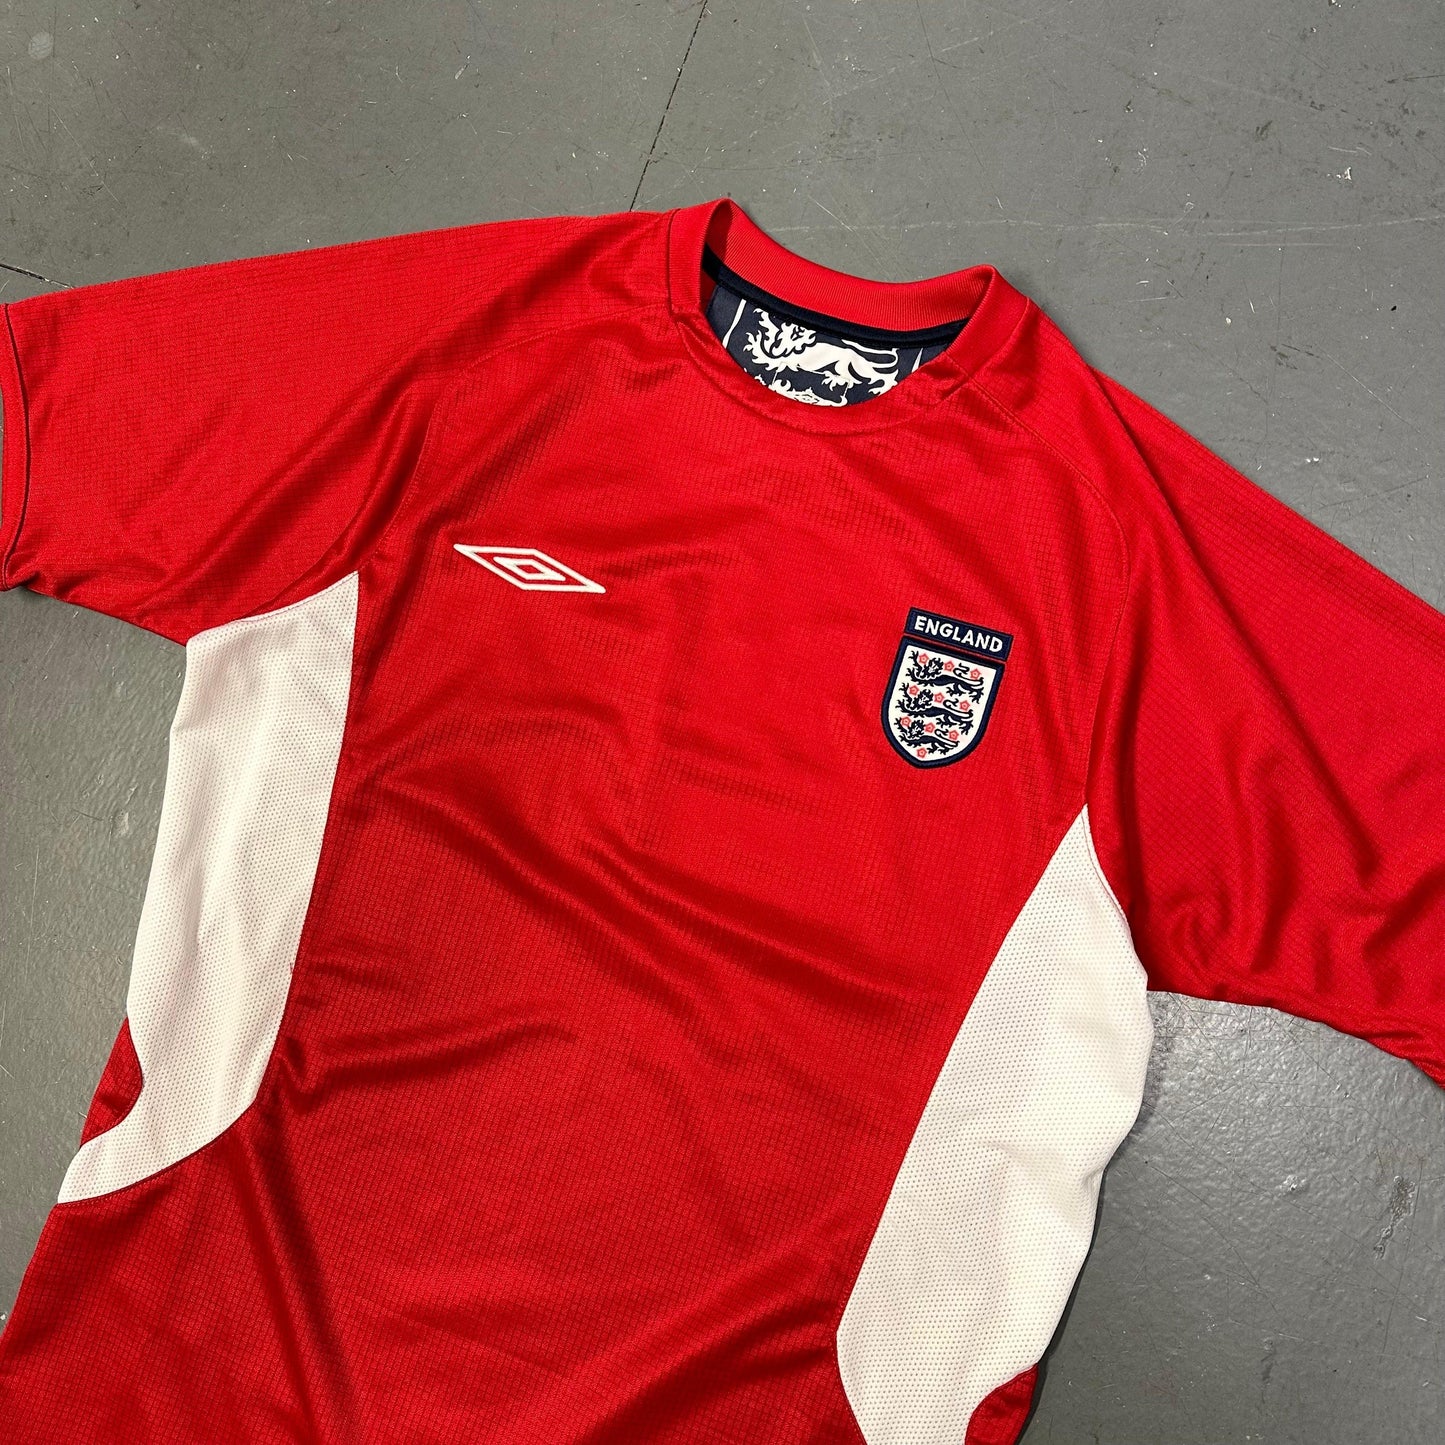 Umbro England 2006/07 Training Shirt In Red ( S )